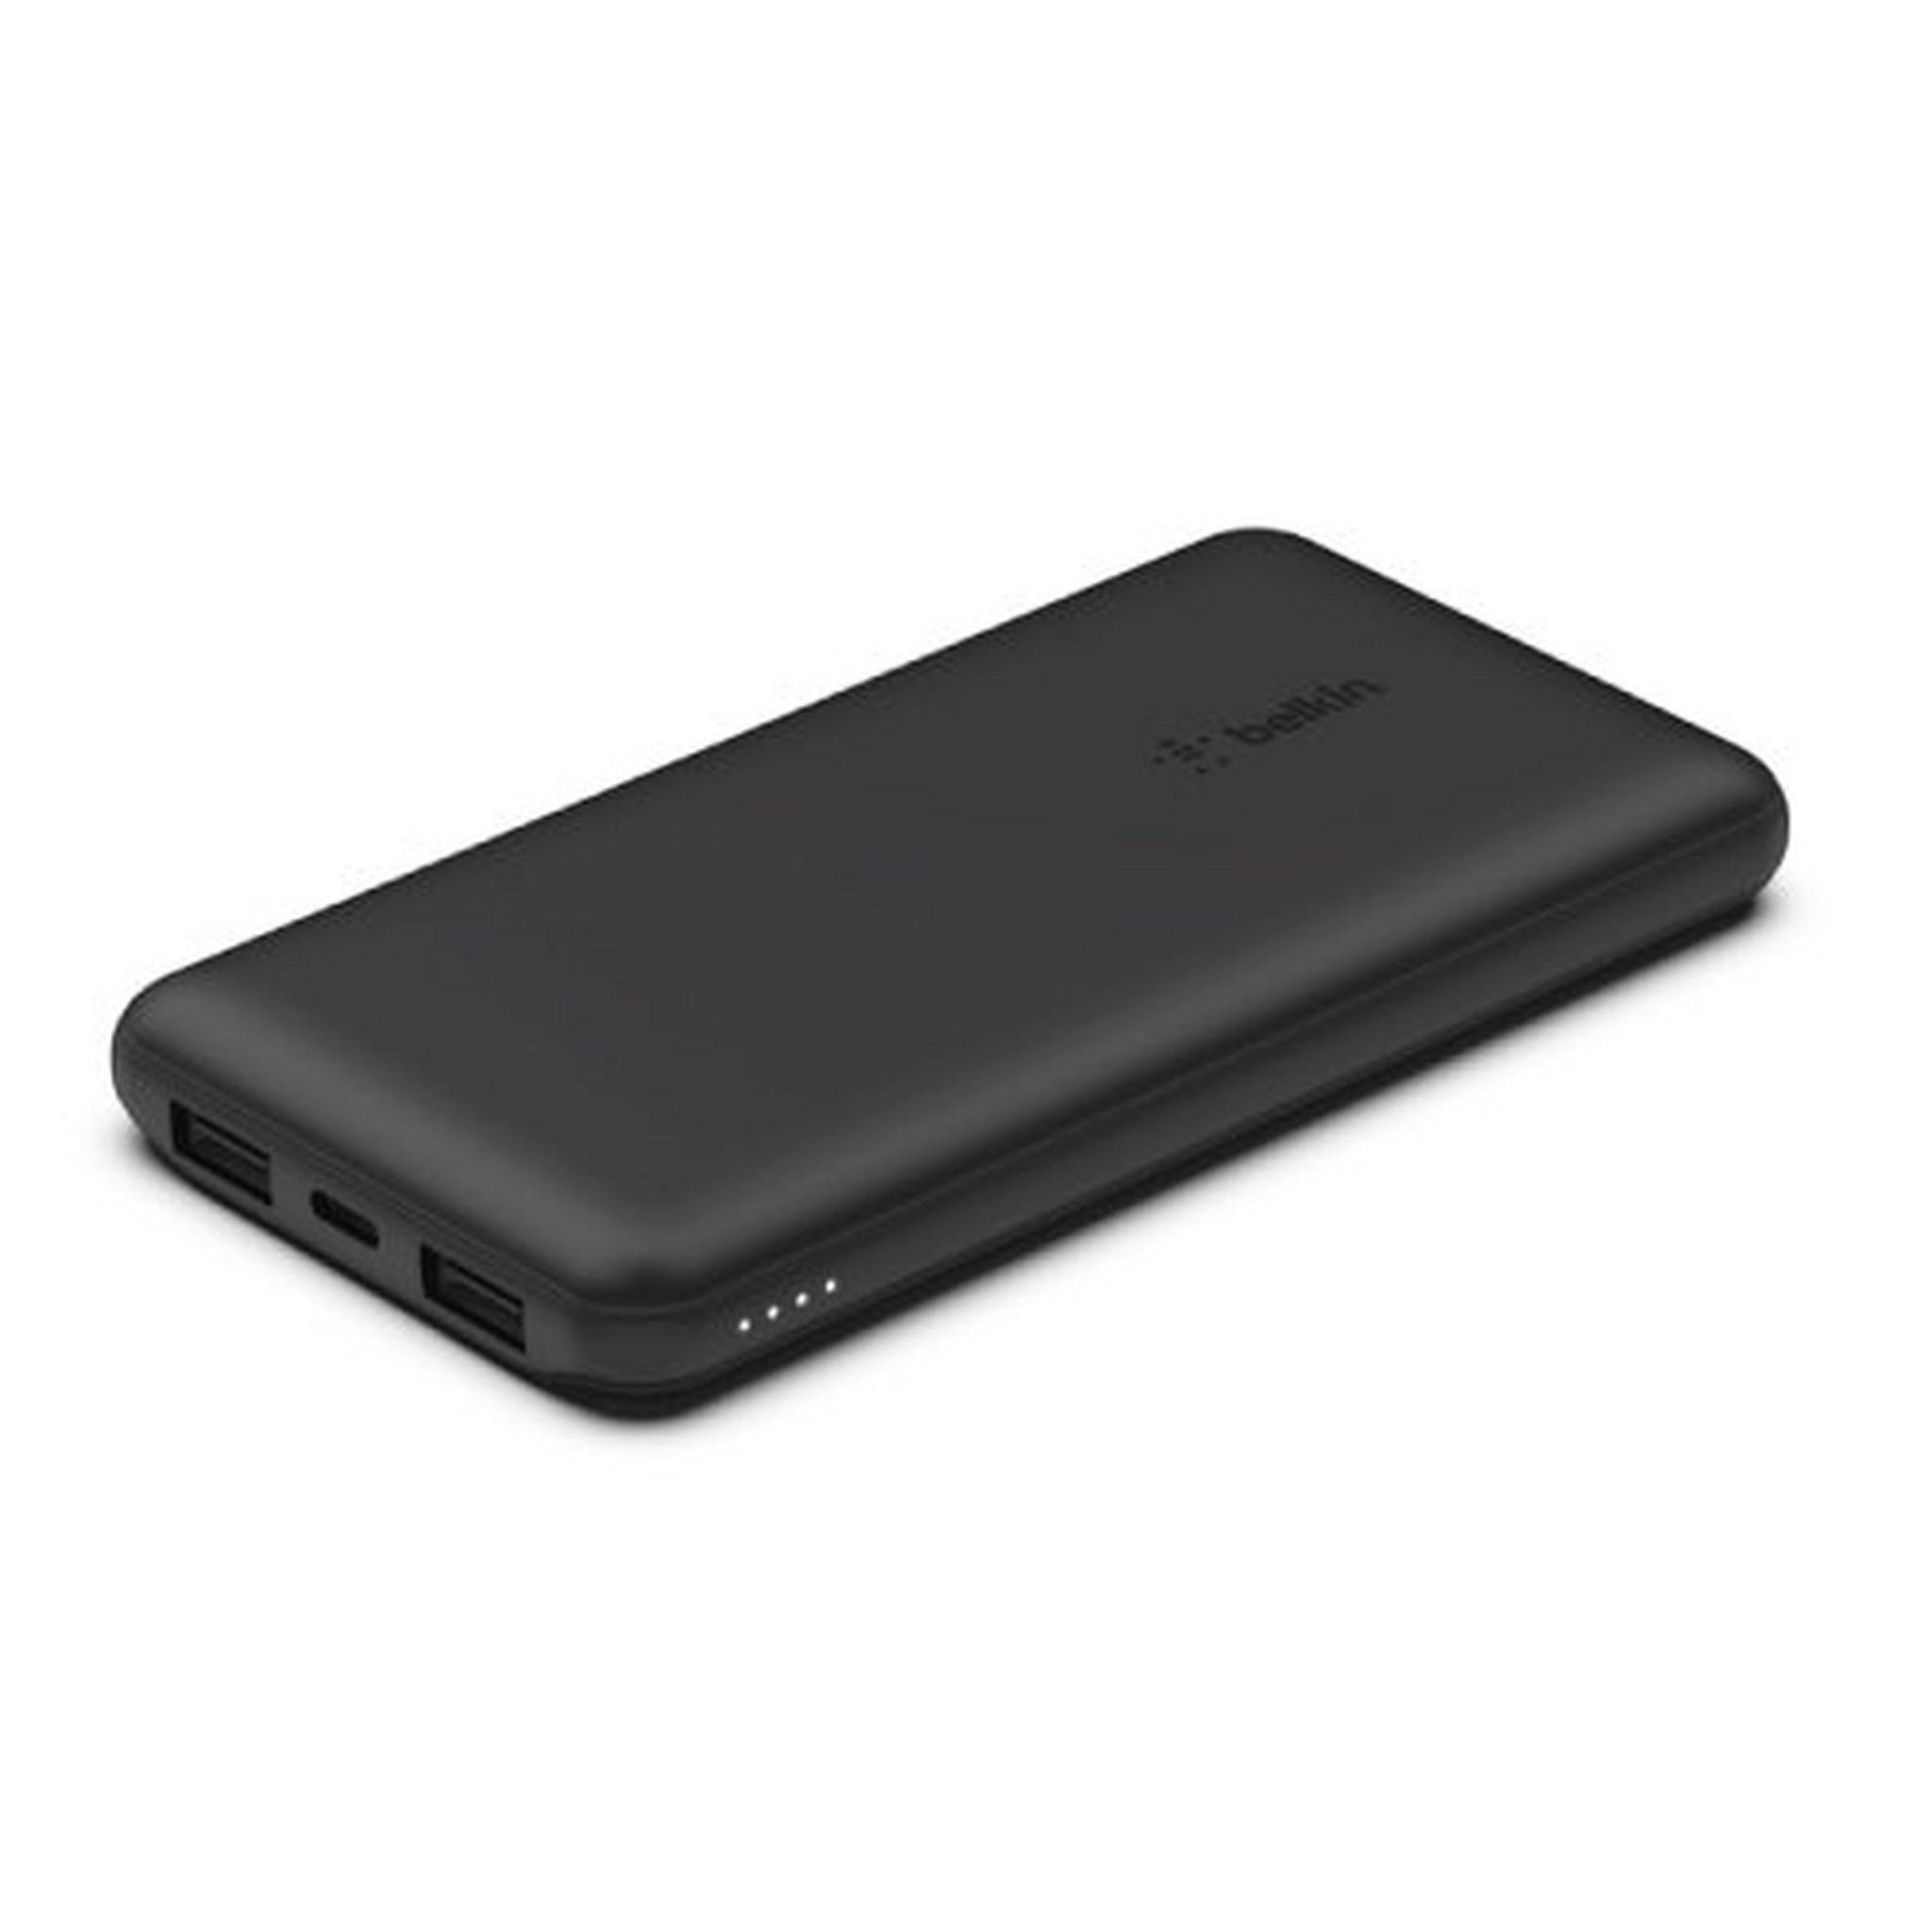 Belkin 10000mAh 15W Power Bank + USB-A to USB-C Cable - Black